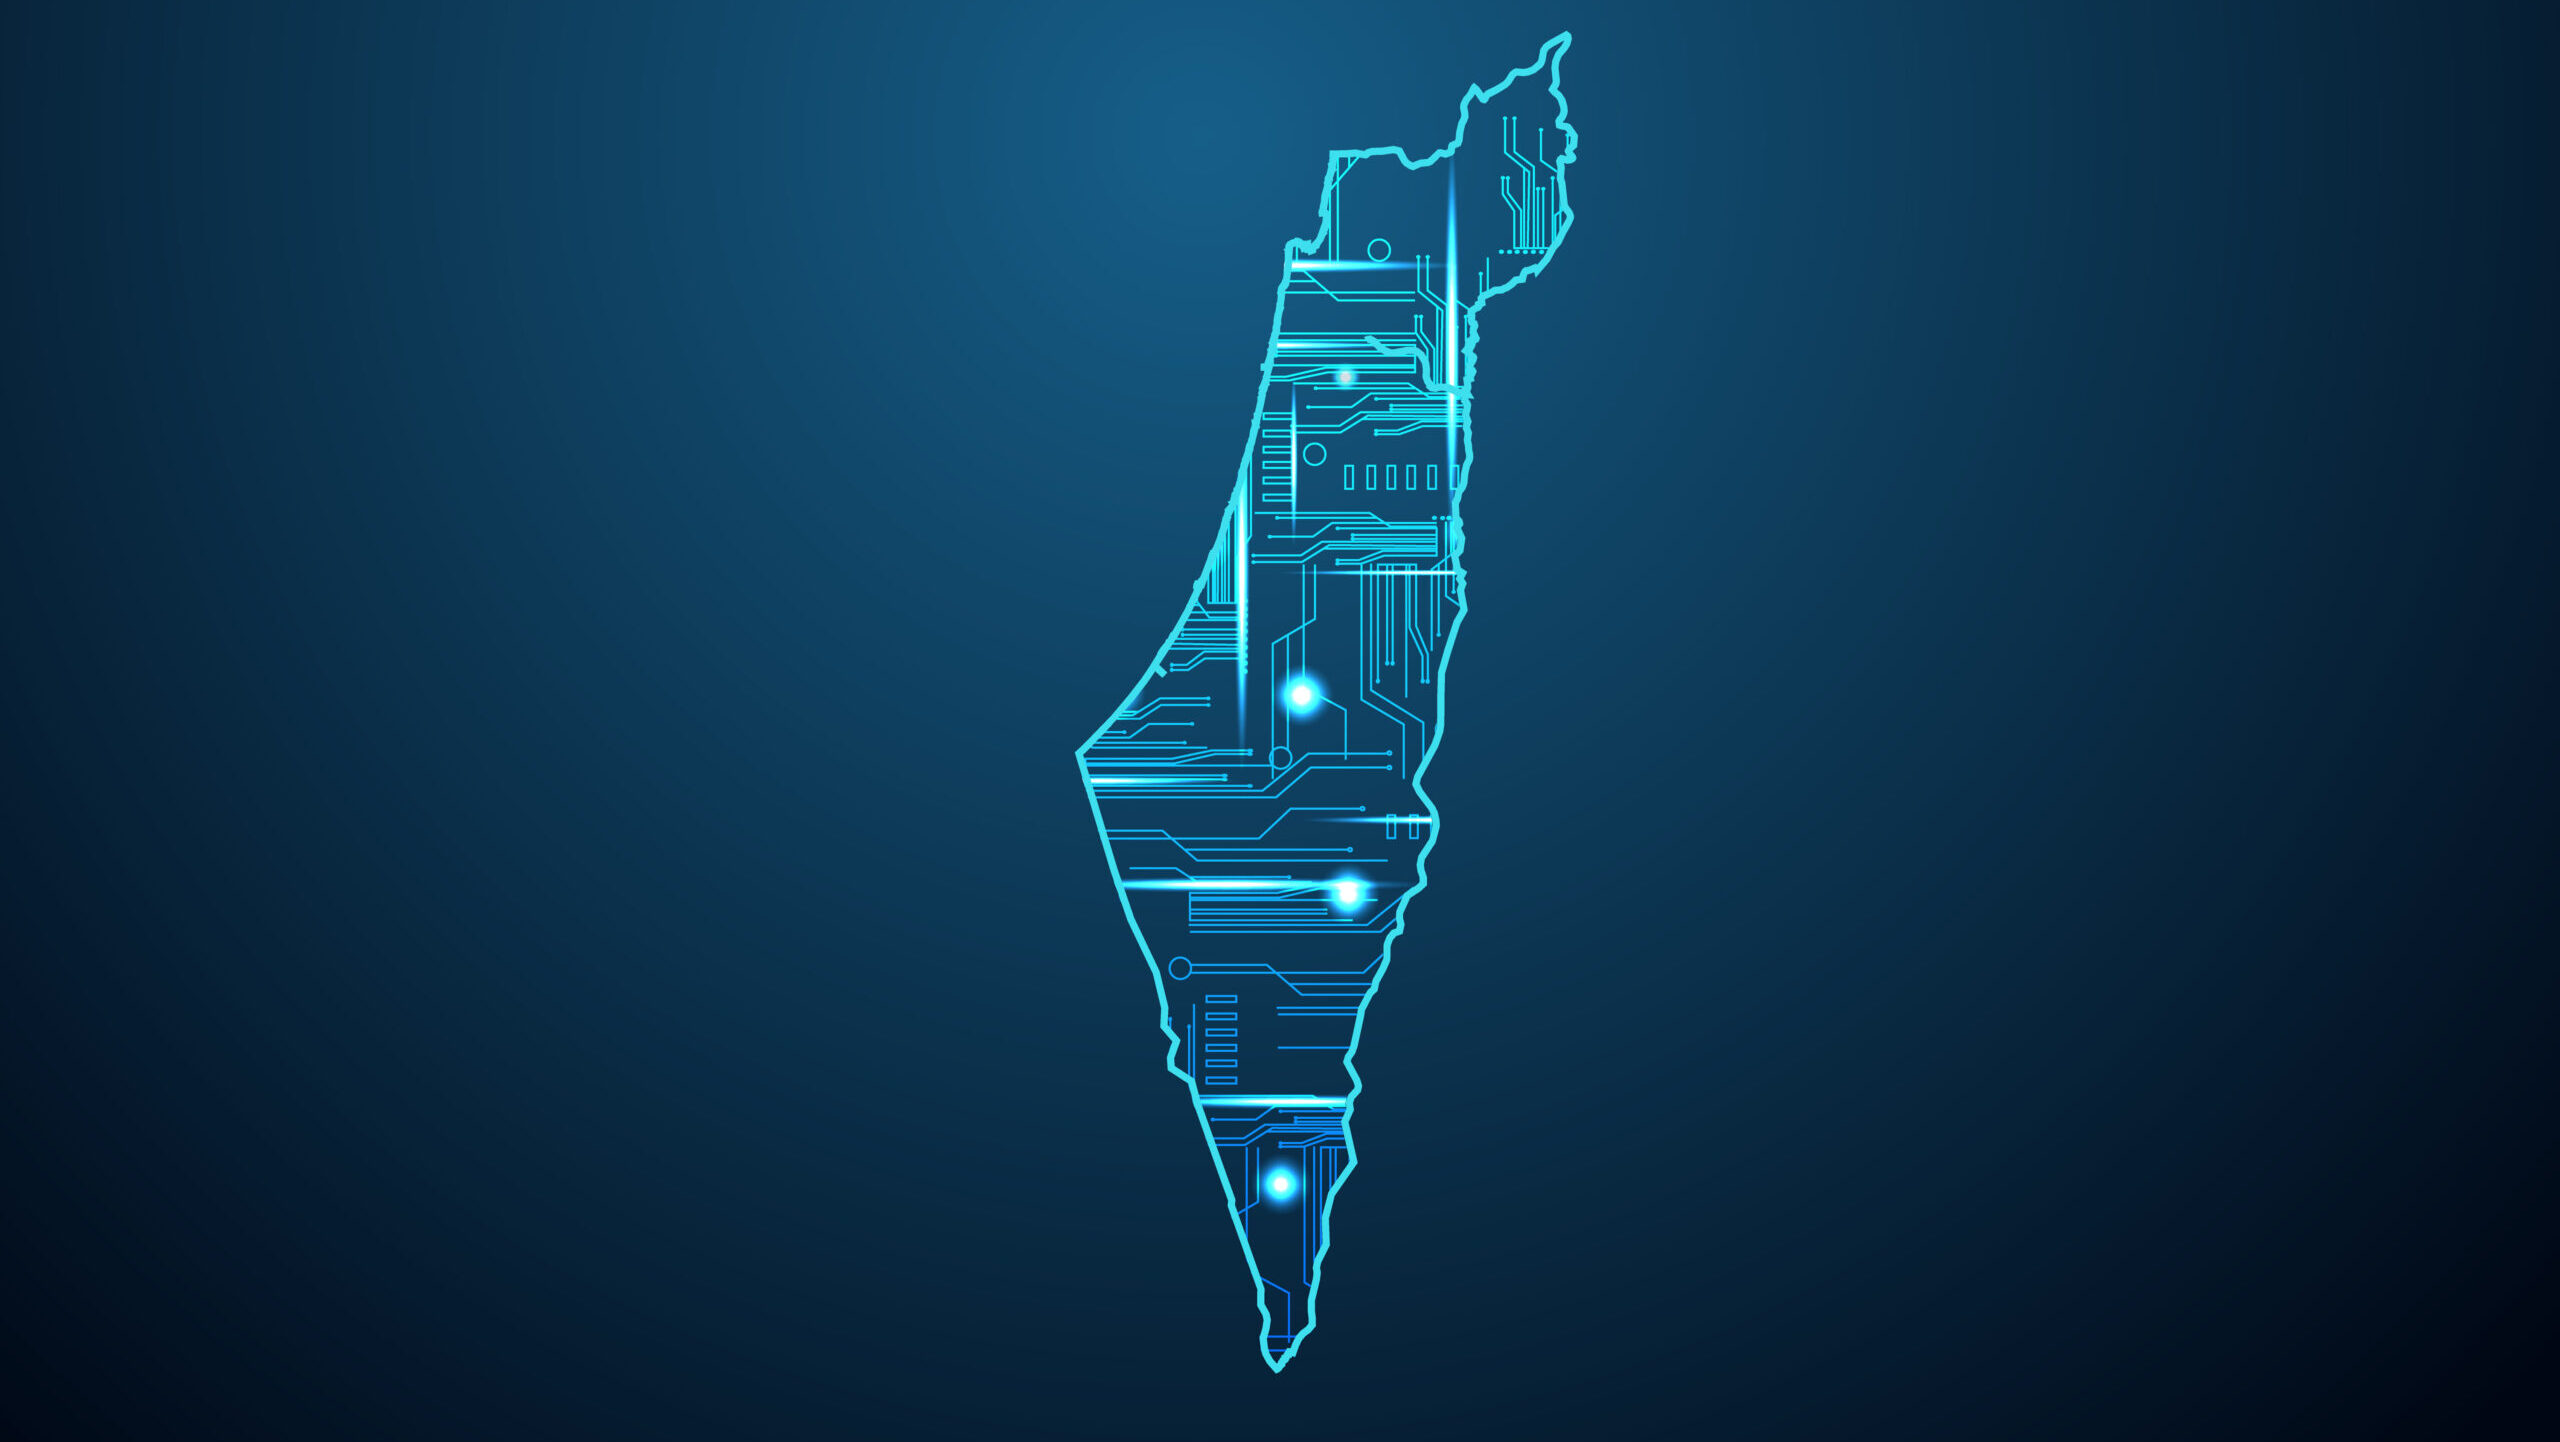 Quiet Boycott: Will Declining Investments in Israeli Tech Push Companies Abroad?